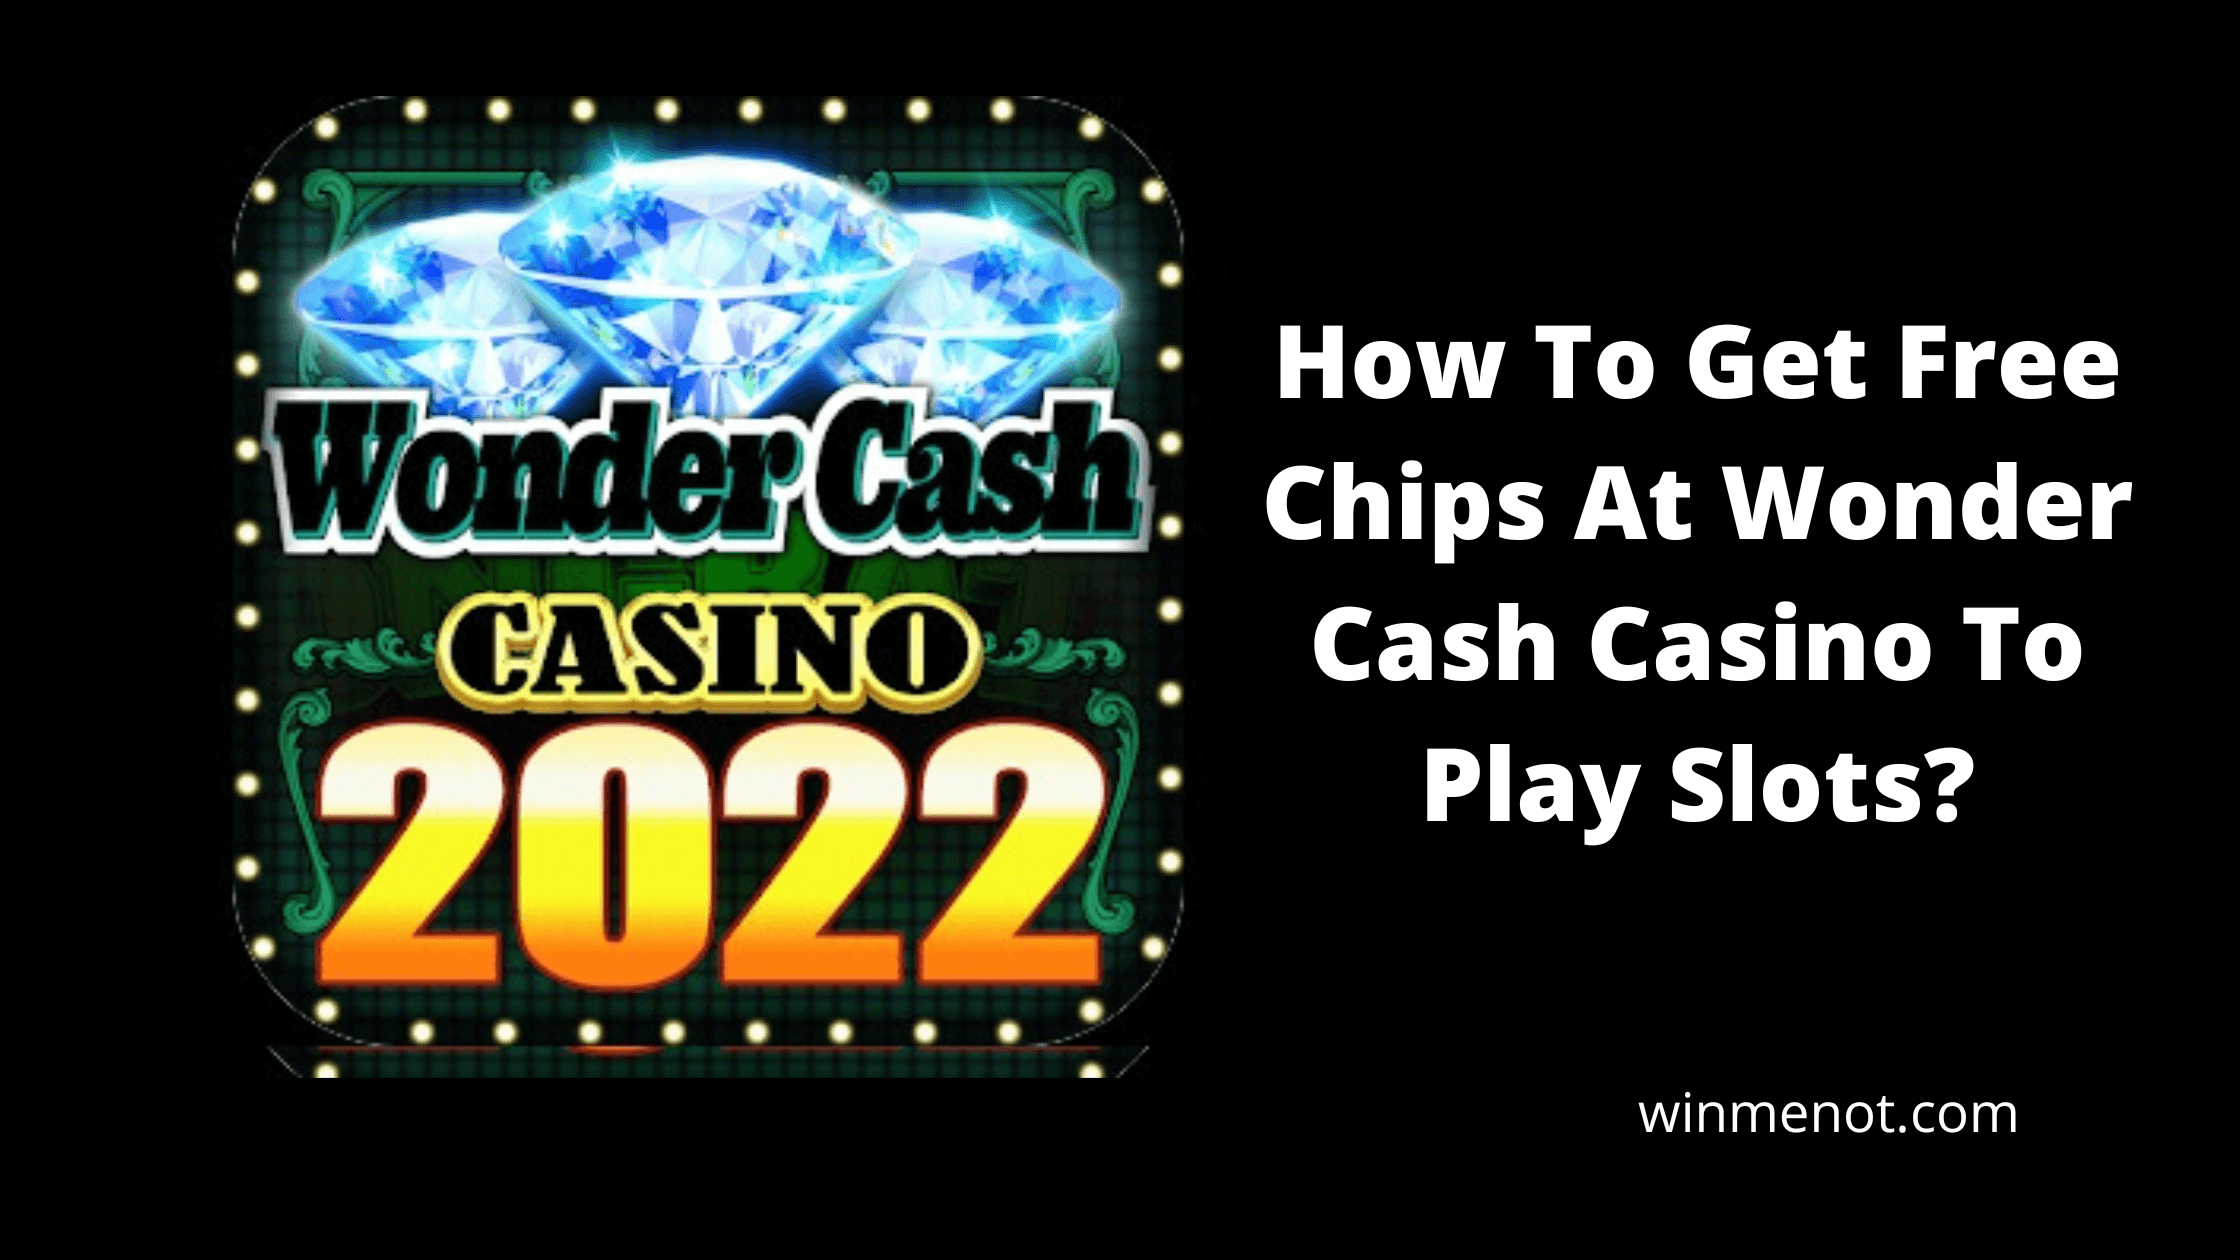 How to get free chips at wonder cash casino to play slots